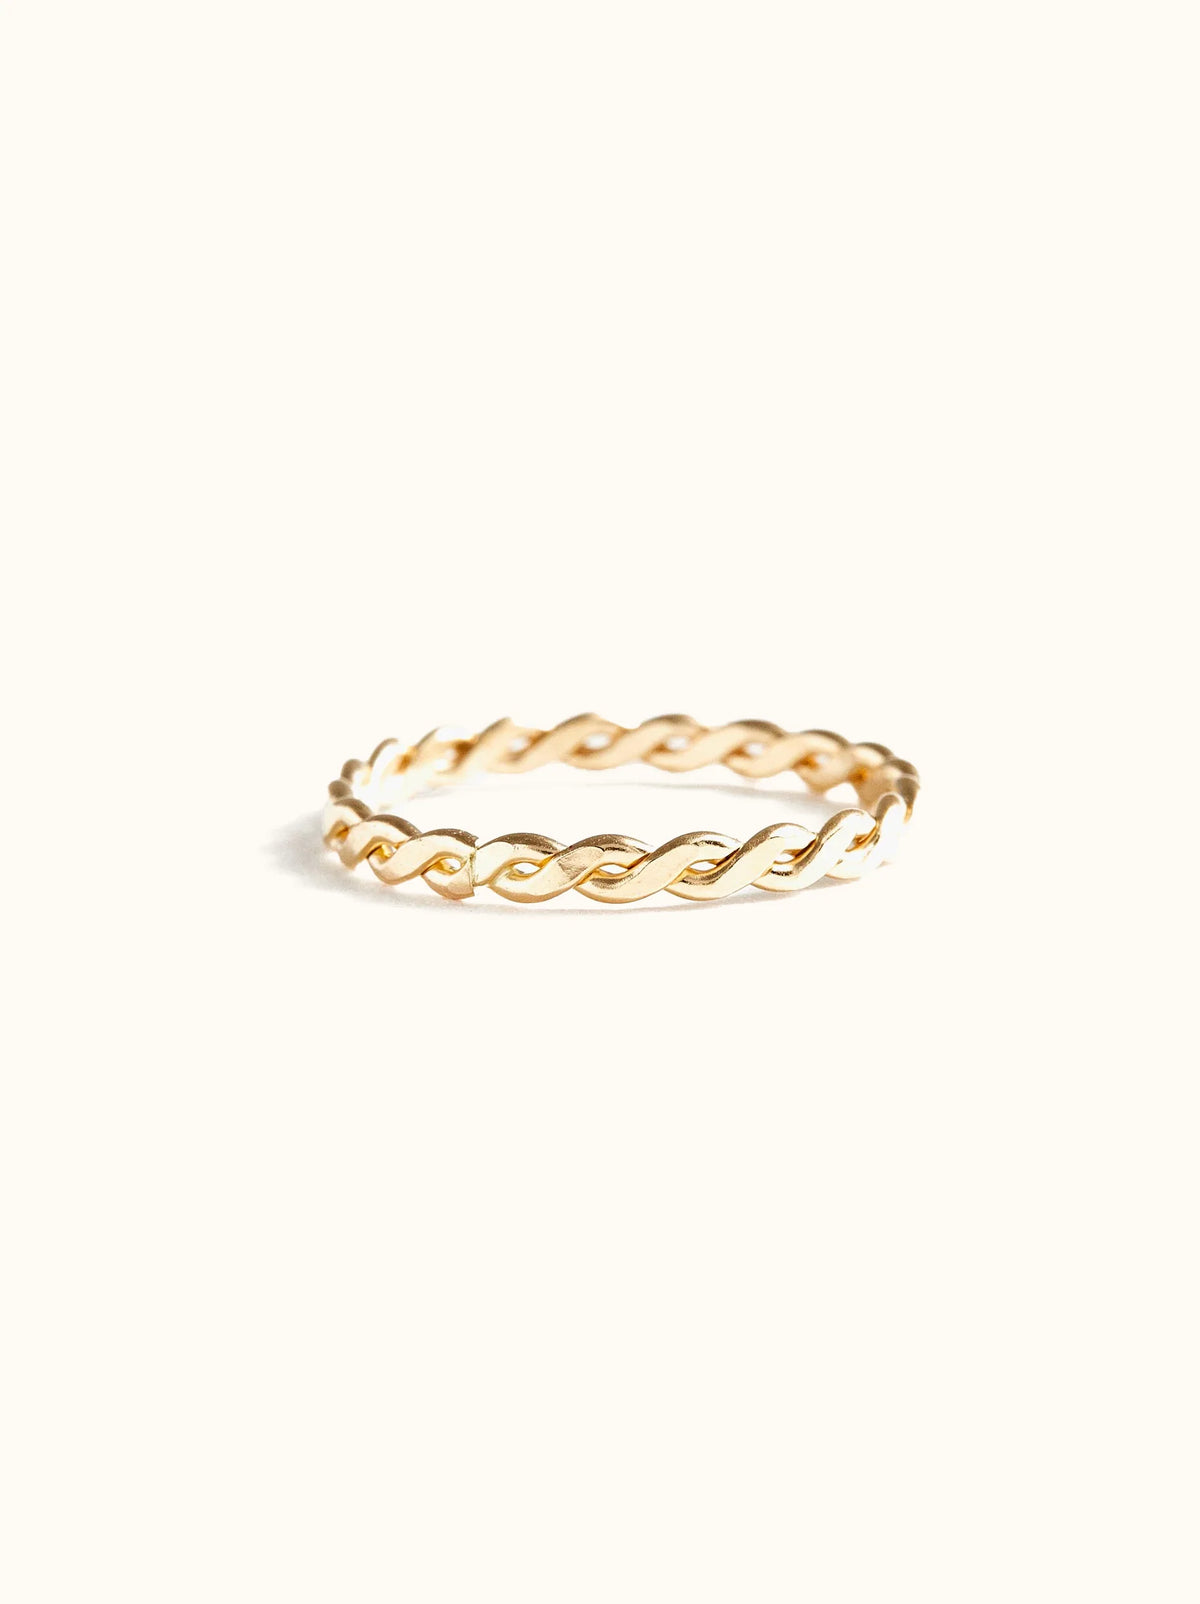 ABLE ivy ring in 14k gold fill